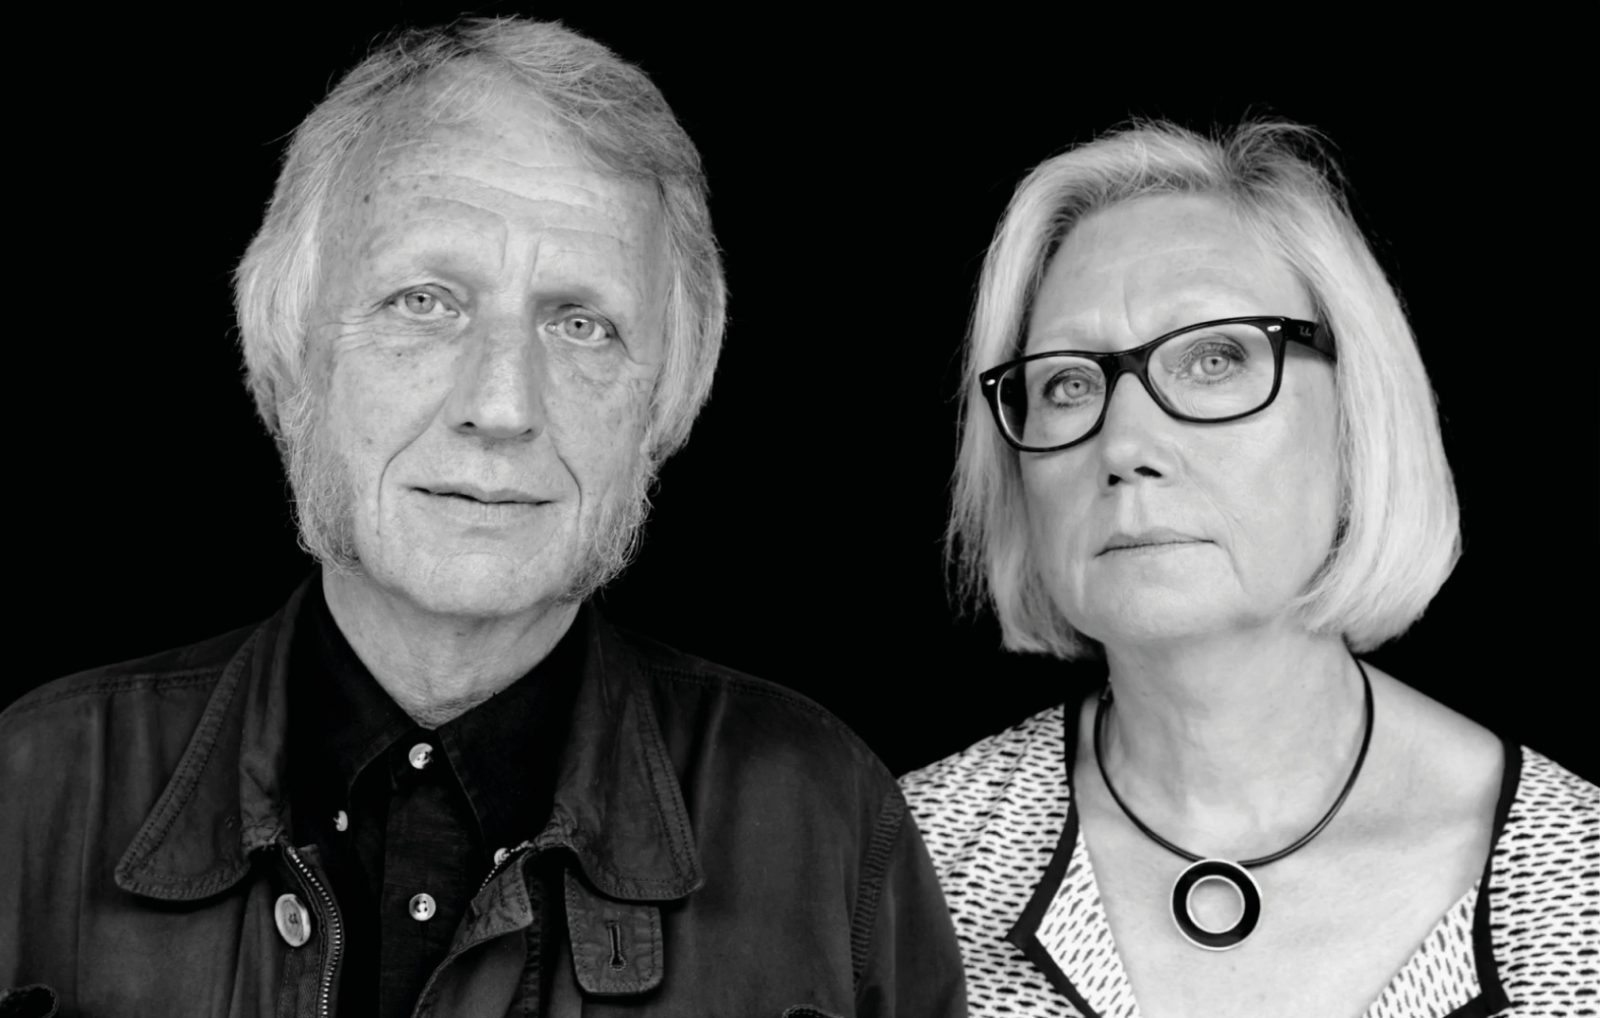 Portrait of grey-blond man and woman, Knut Hagberg and Marianne Hagberg, photographed against a black wall.